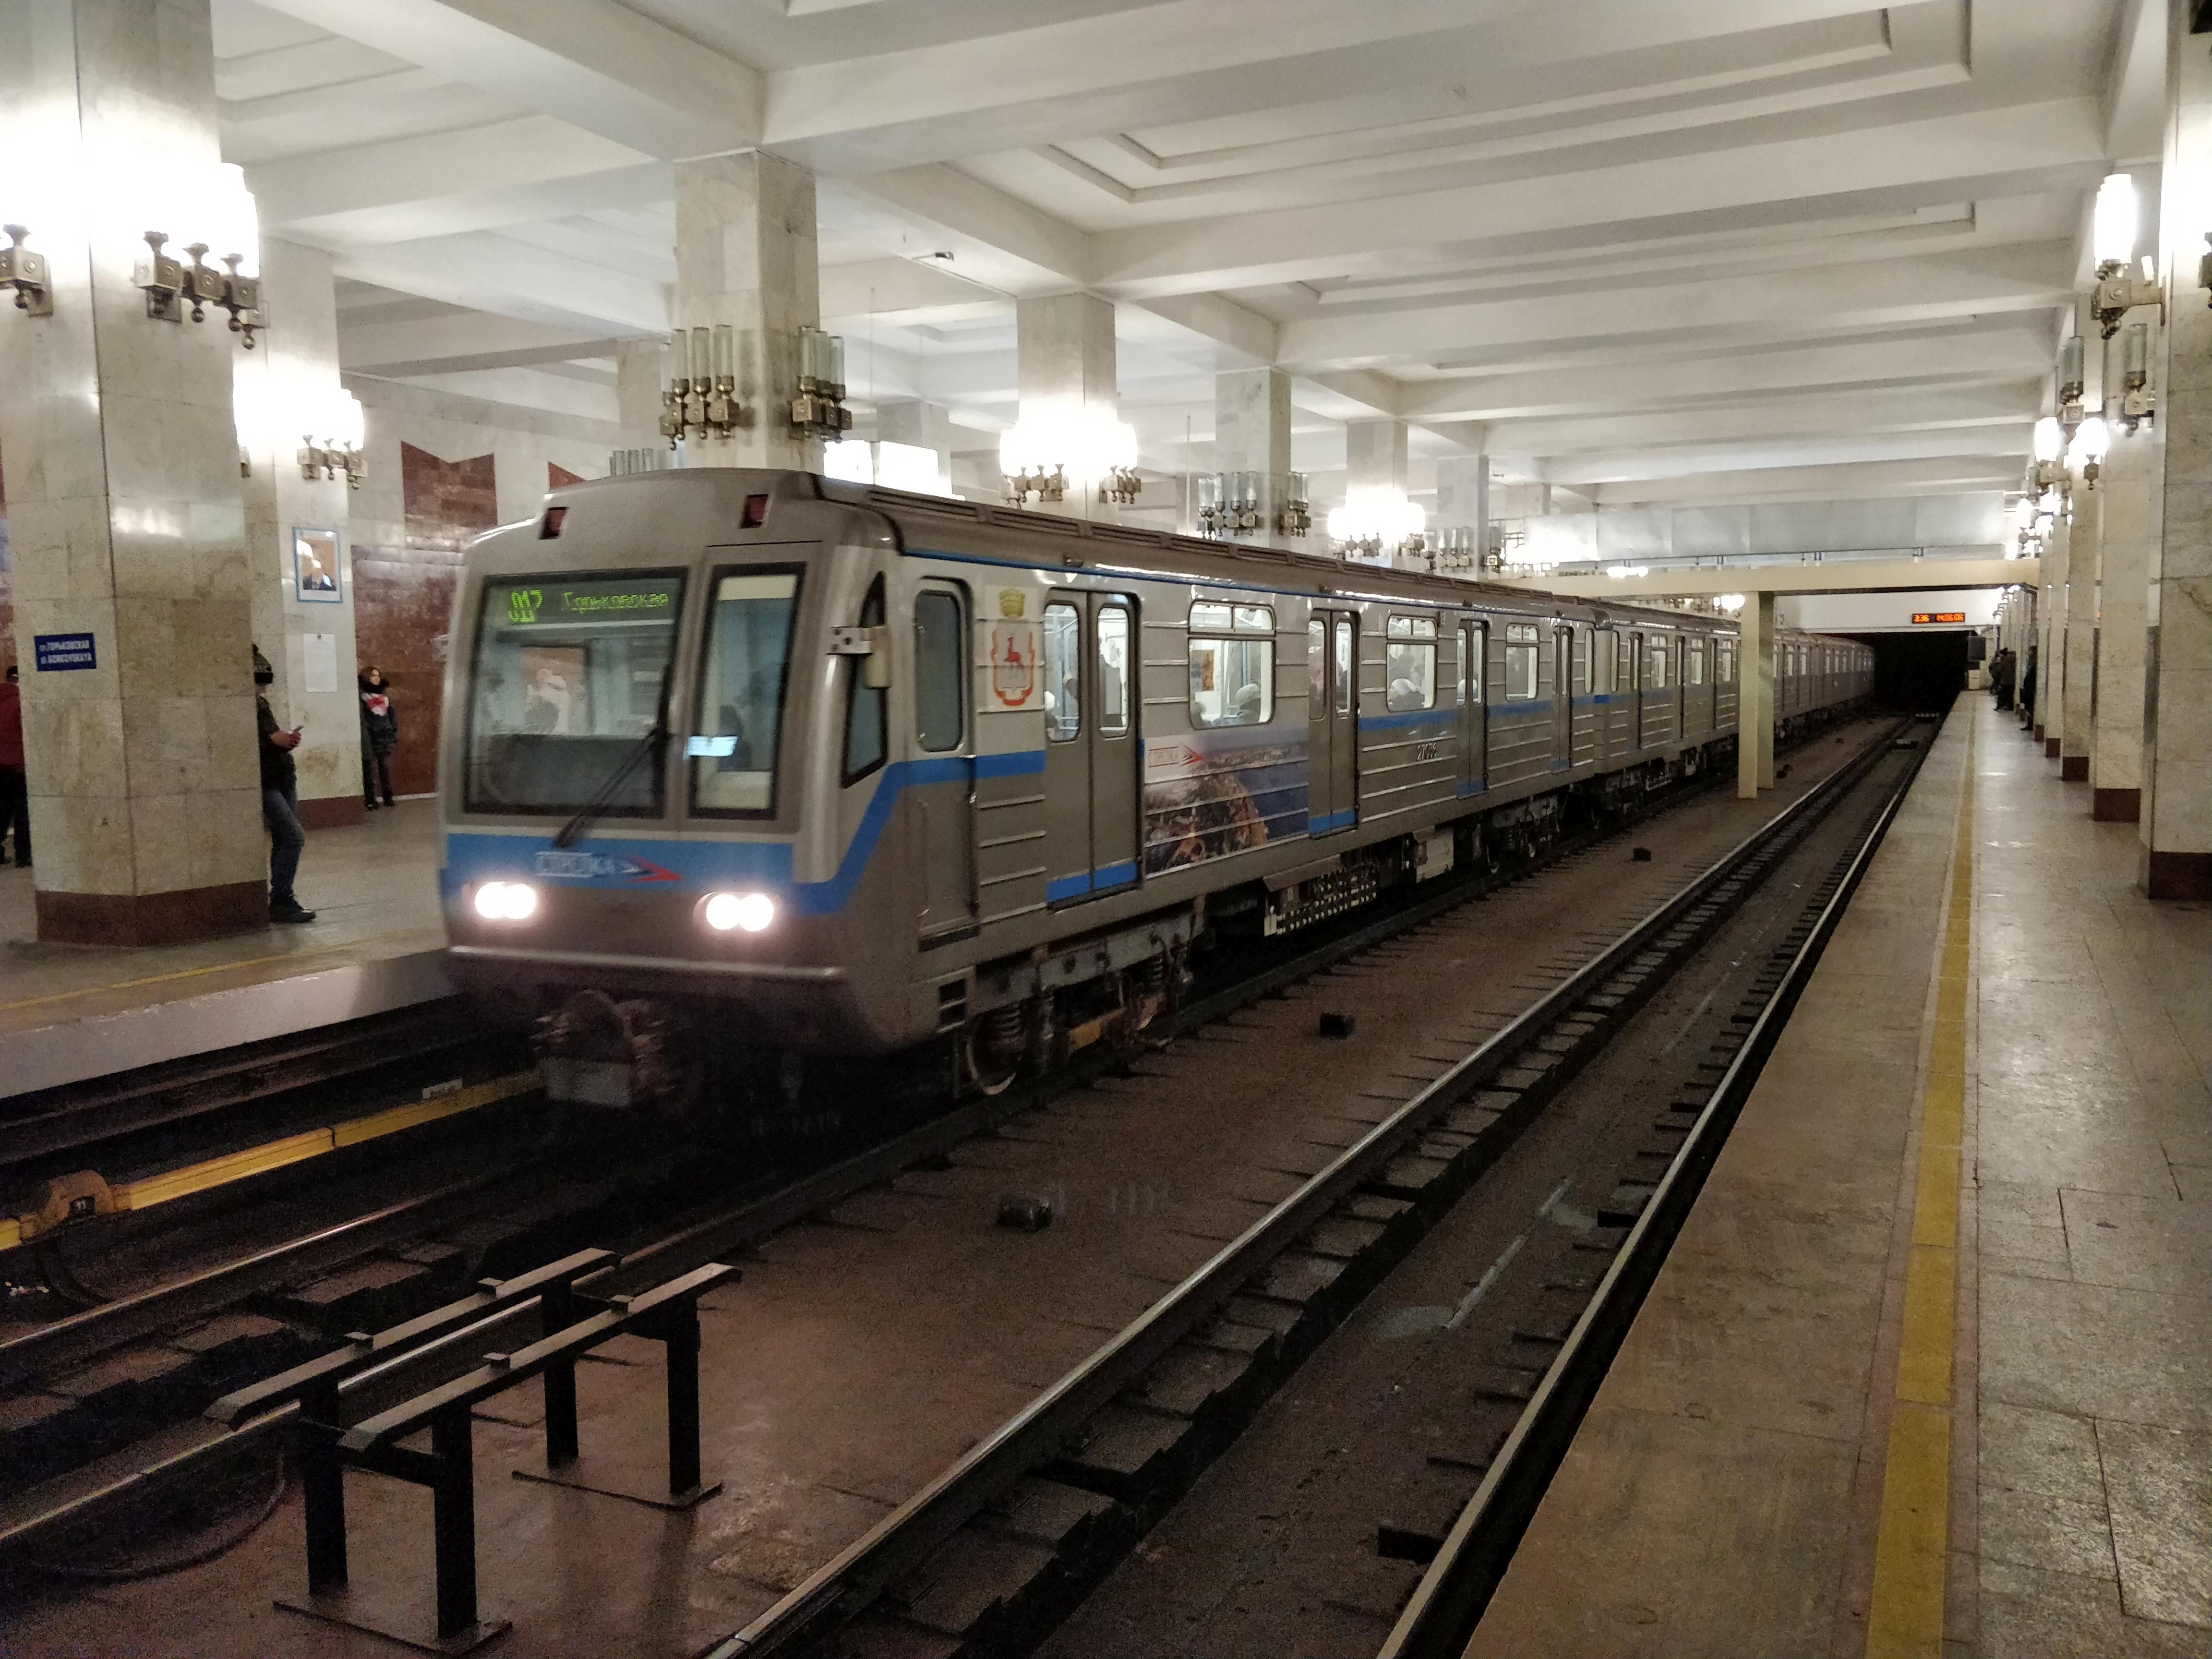 FUNET Railway Photography Archive: Russia - metro trains